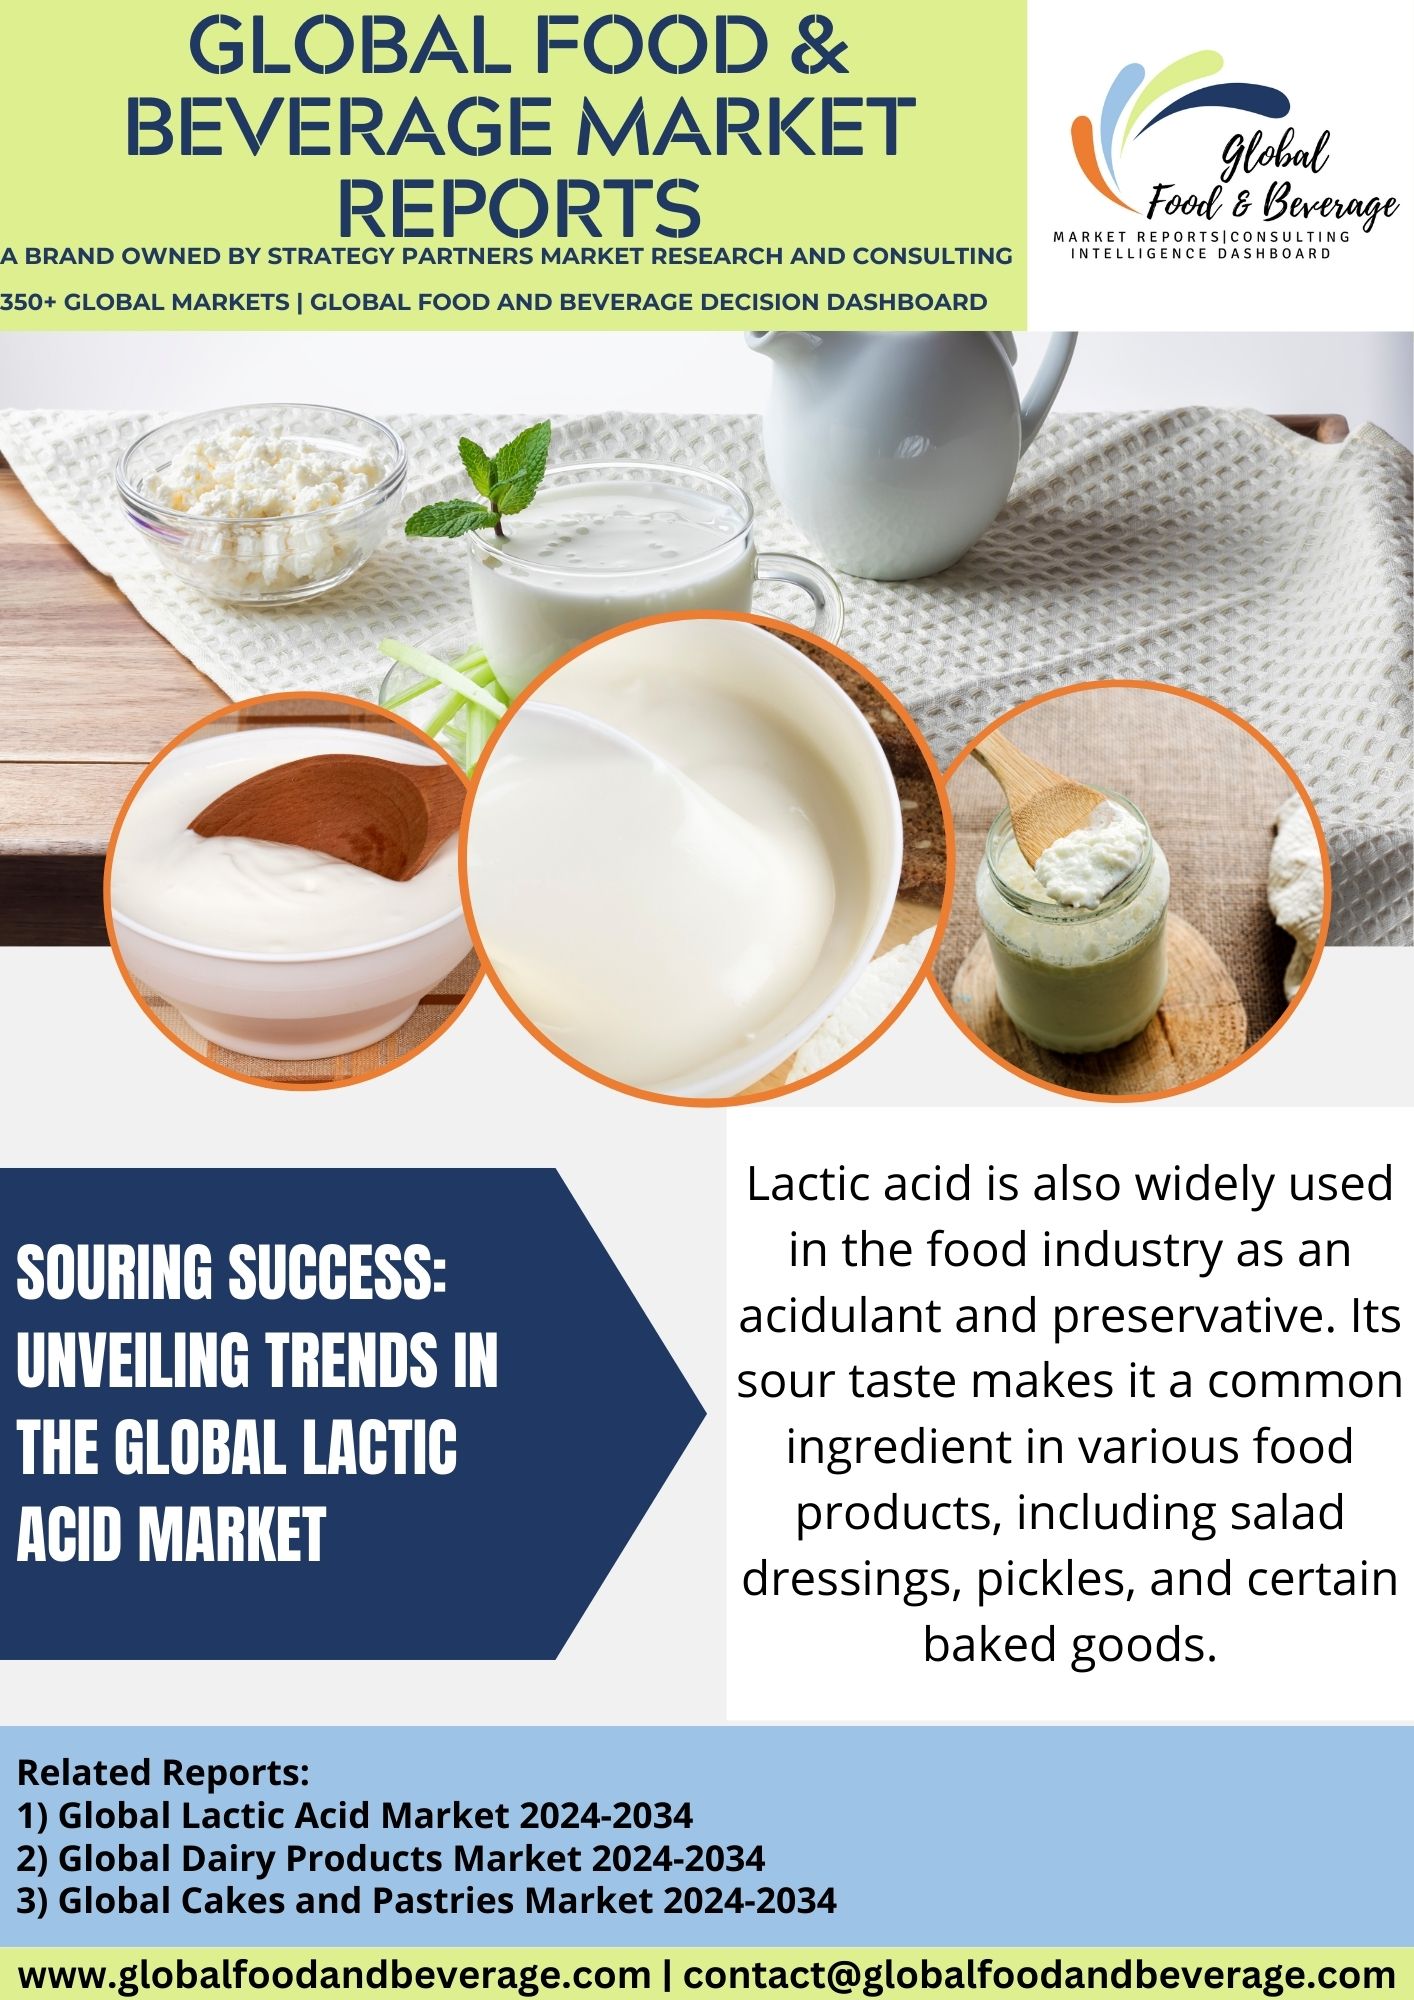 Unveiling Trends in the Global Lactic Acid Market